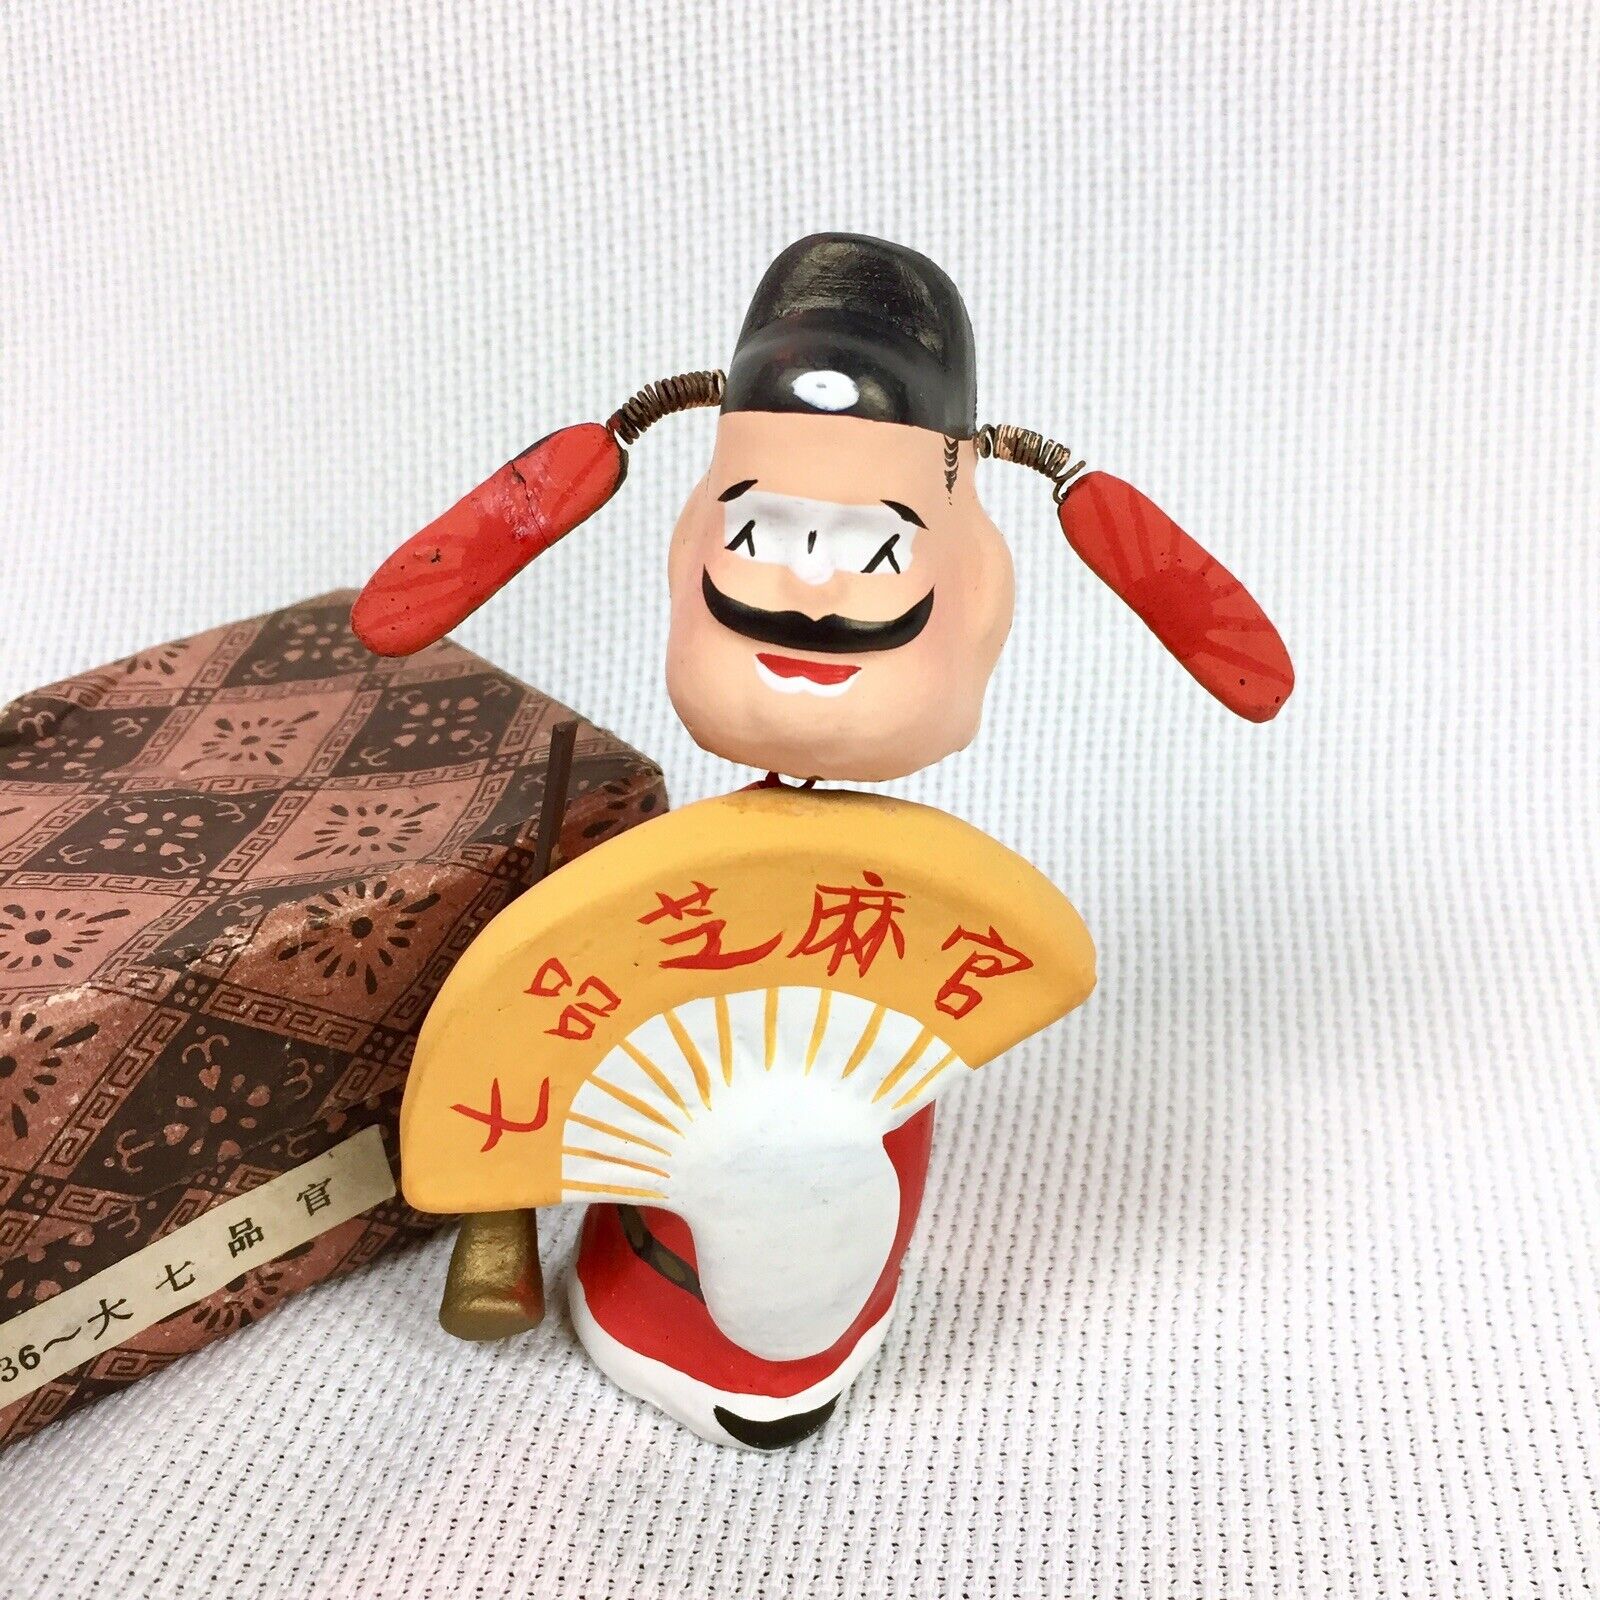 Vtg Chinese Judge Bobblehead Humor Kitschy Courthouse Handsculpted Handpainted